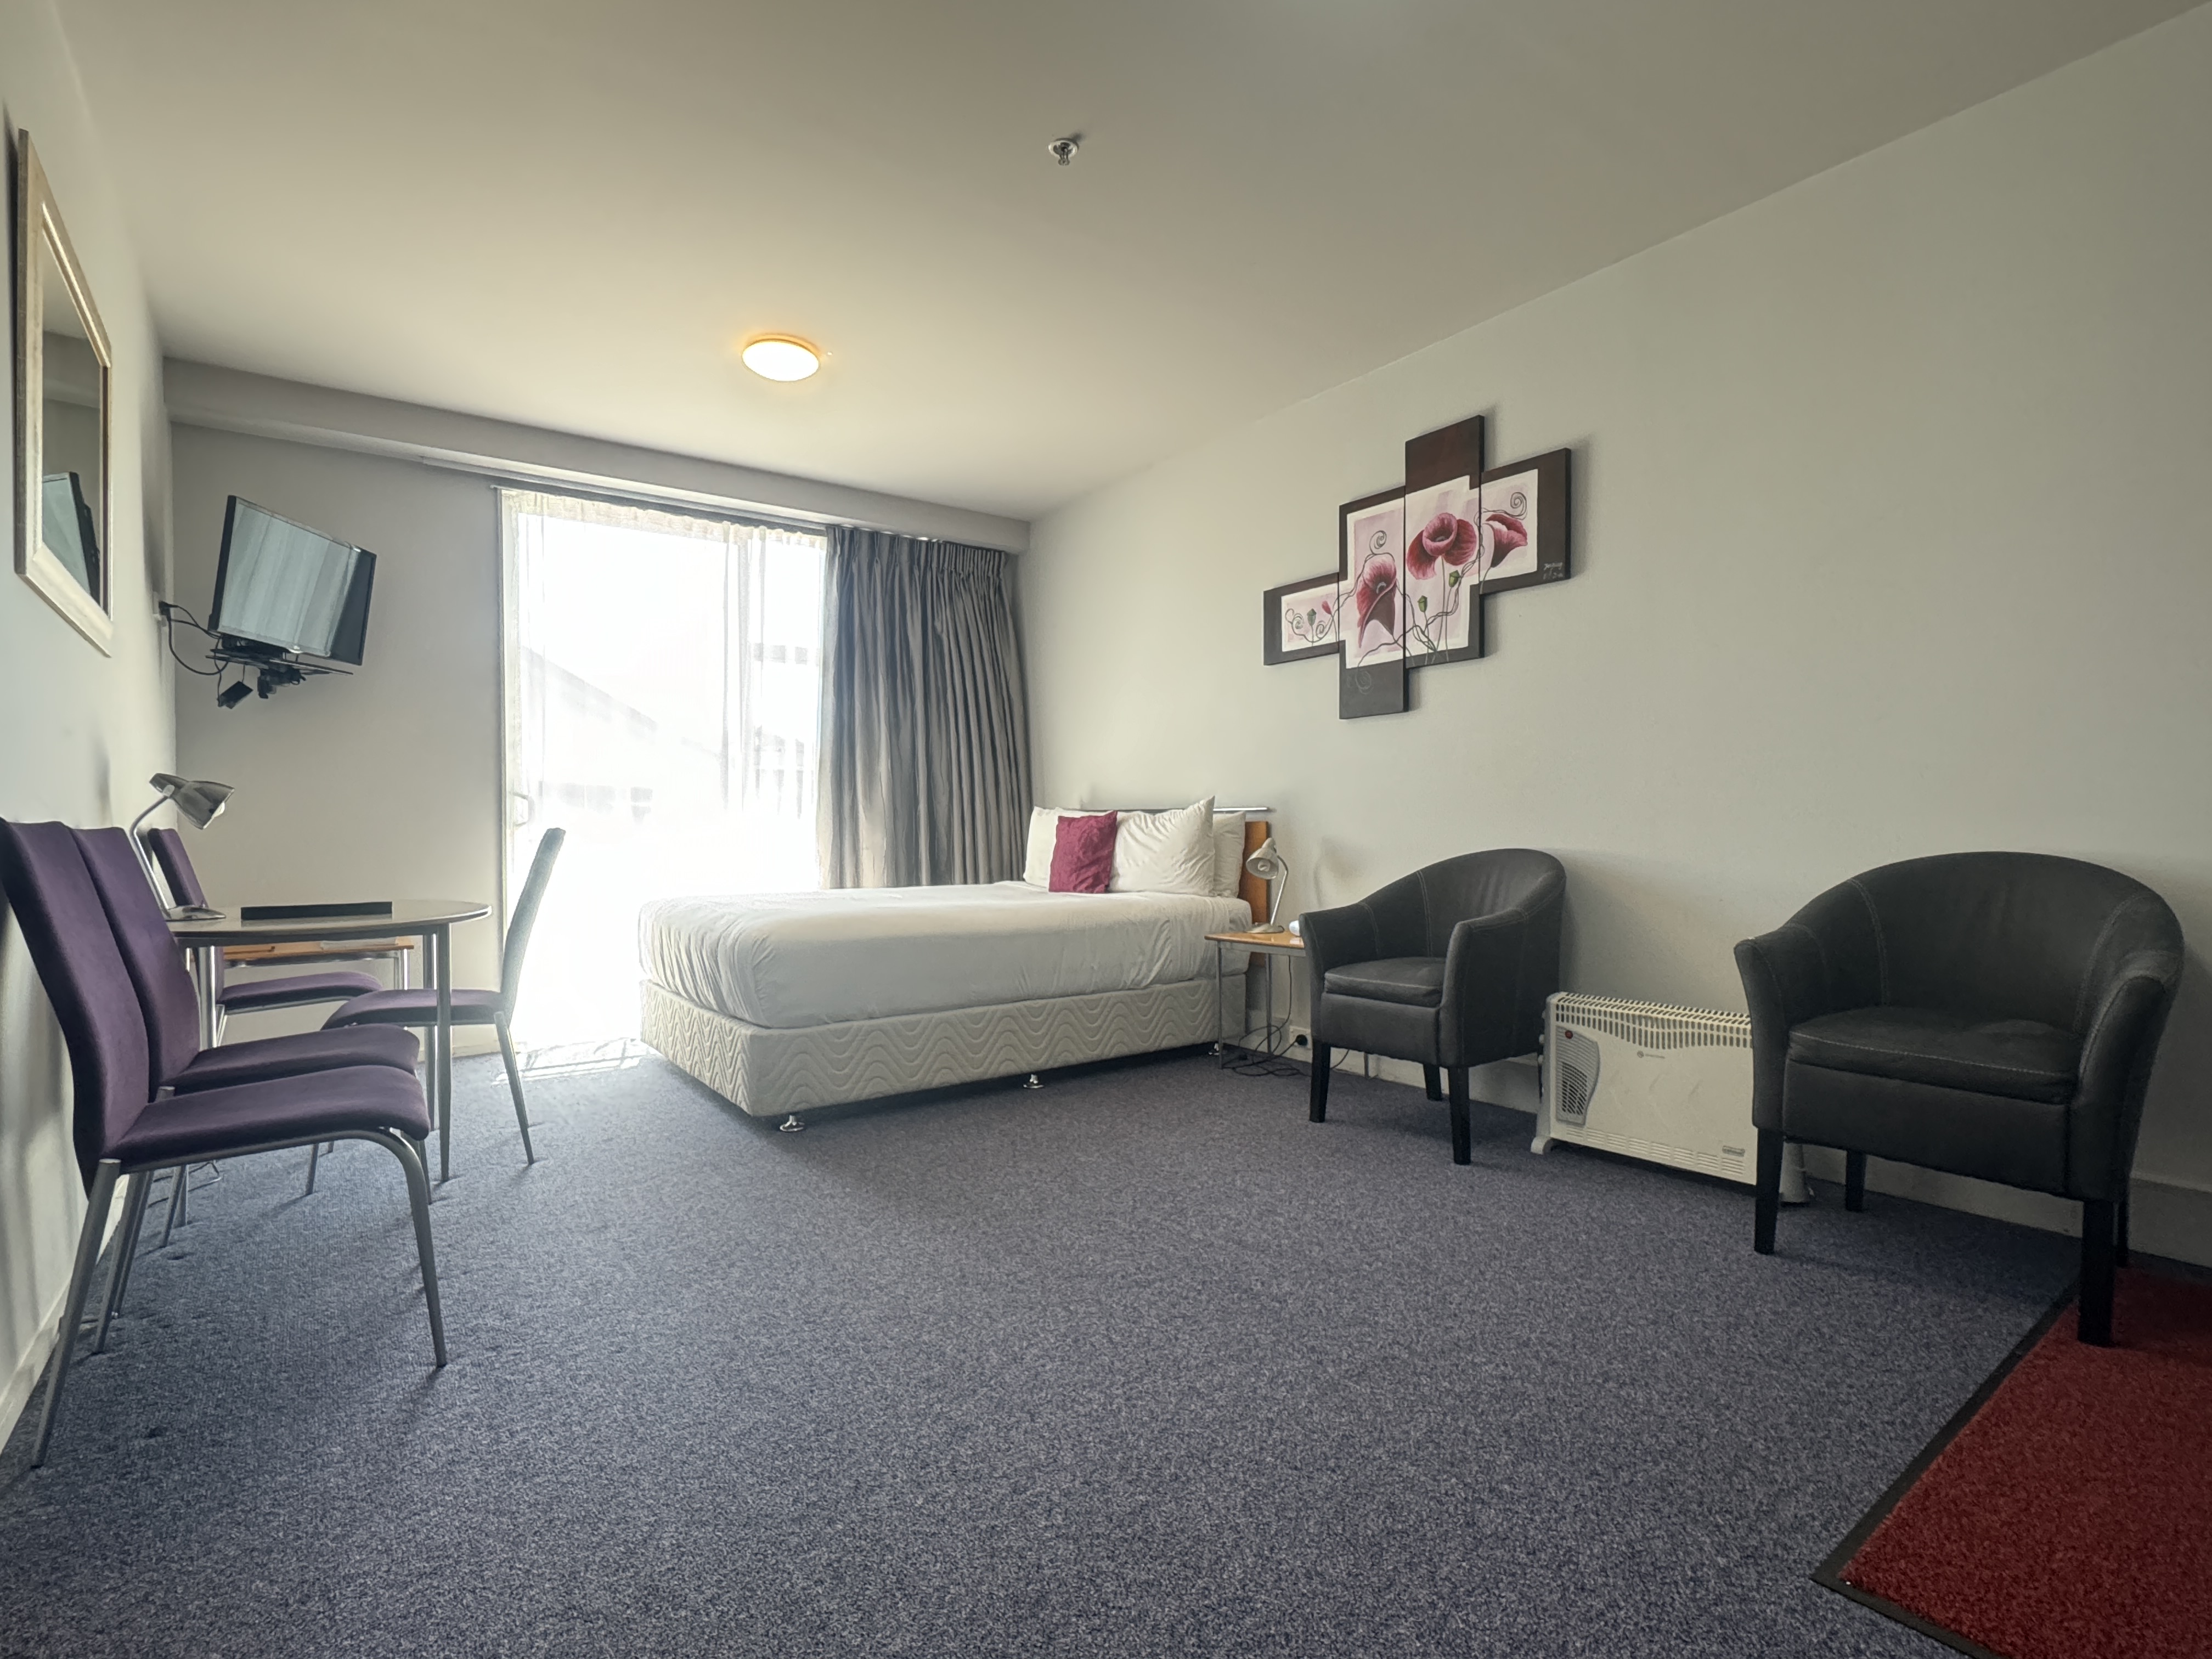 Bowen one-bedroom unit with access facilities